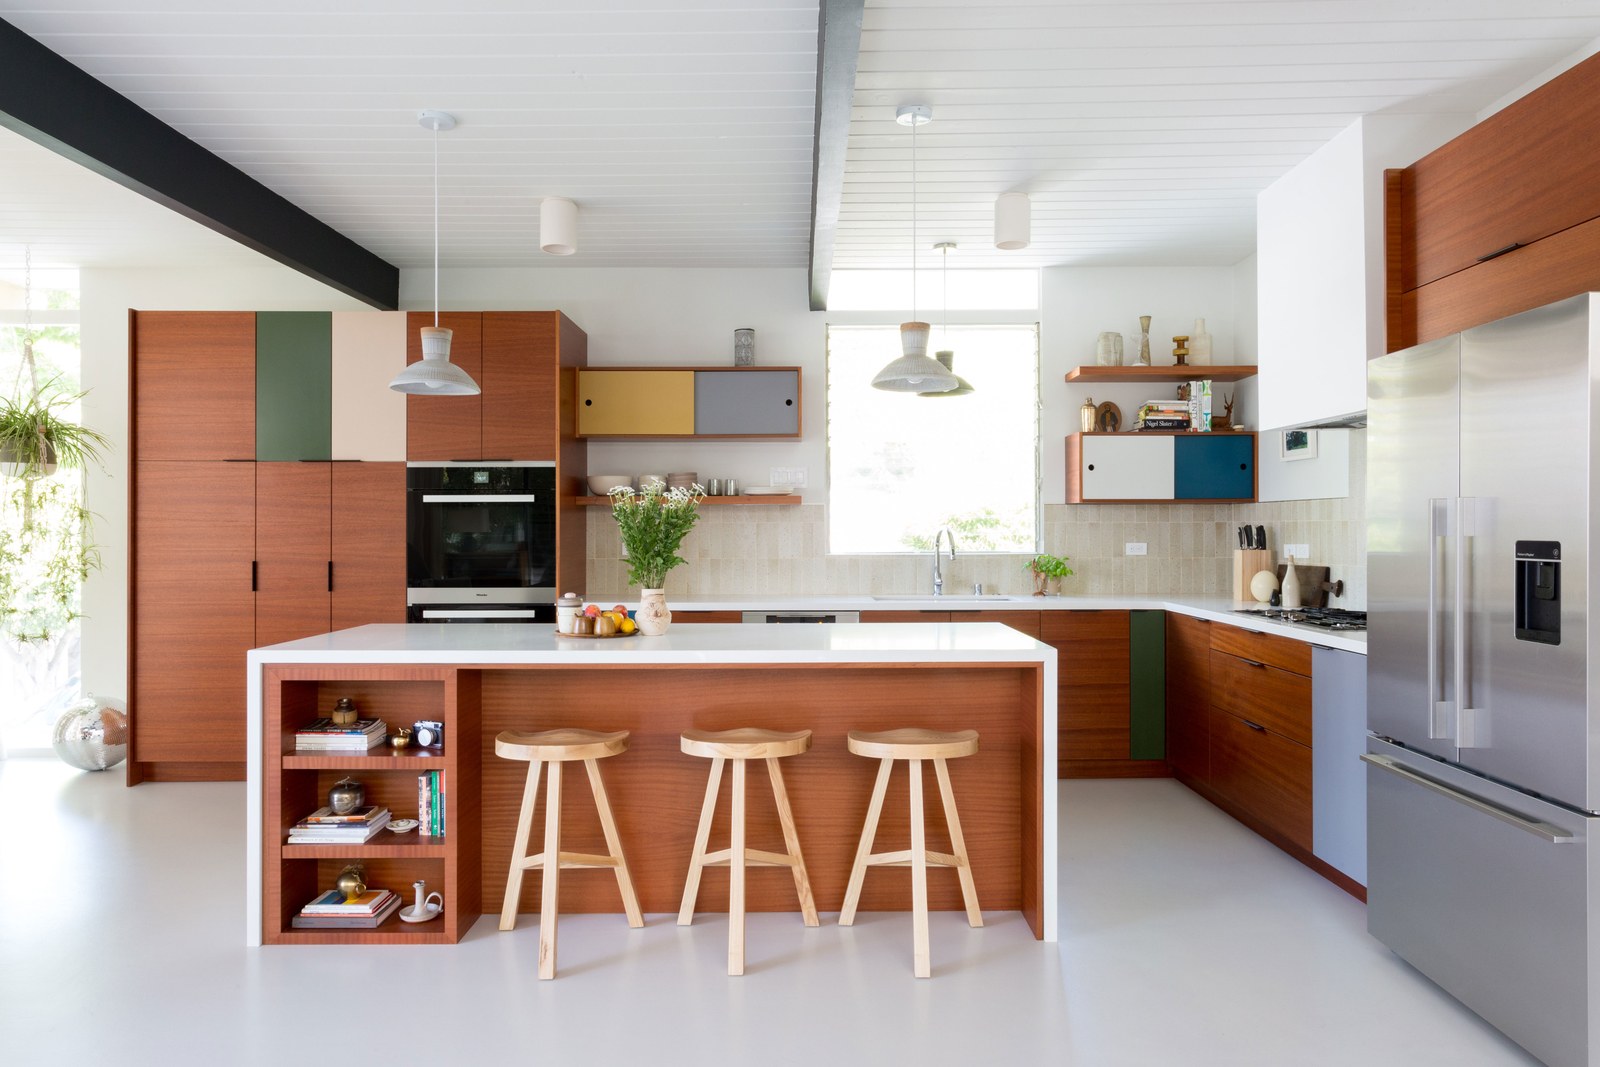 Finding The Best Ikea Kitchen Doors For Your Style